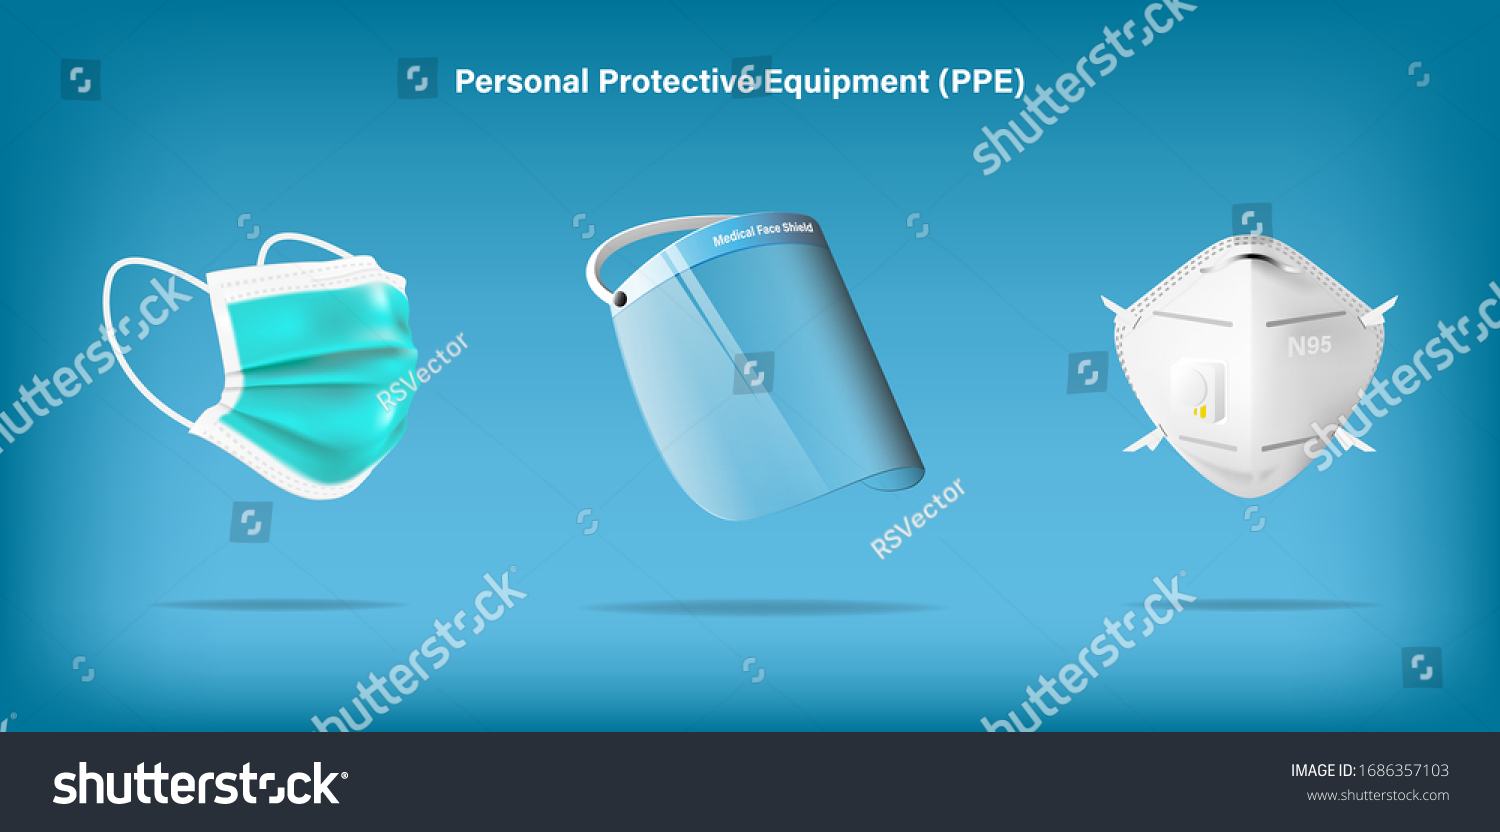 Isolated medical personal protective equipment on background. Pandemic covid-19 virus and protection coronavirus concept. Vector illustration design. #1686357103